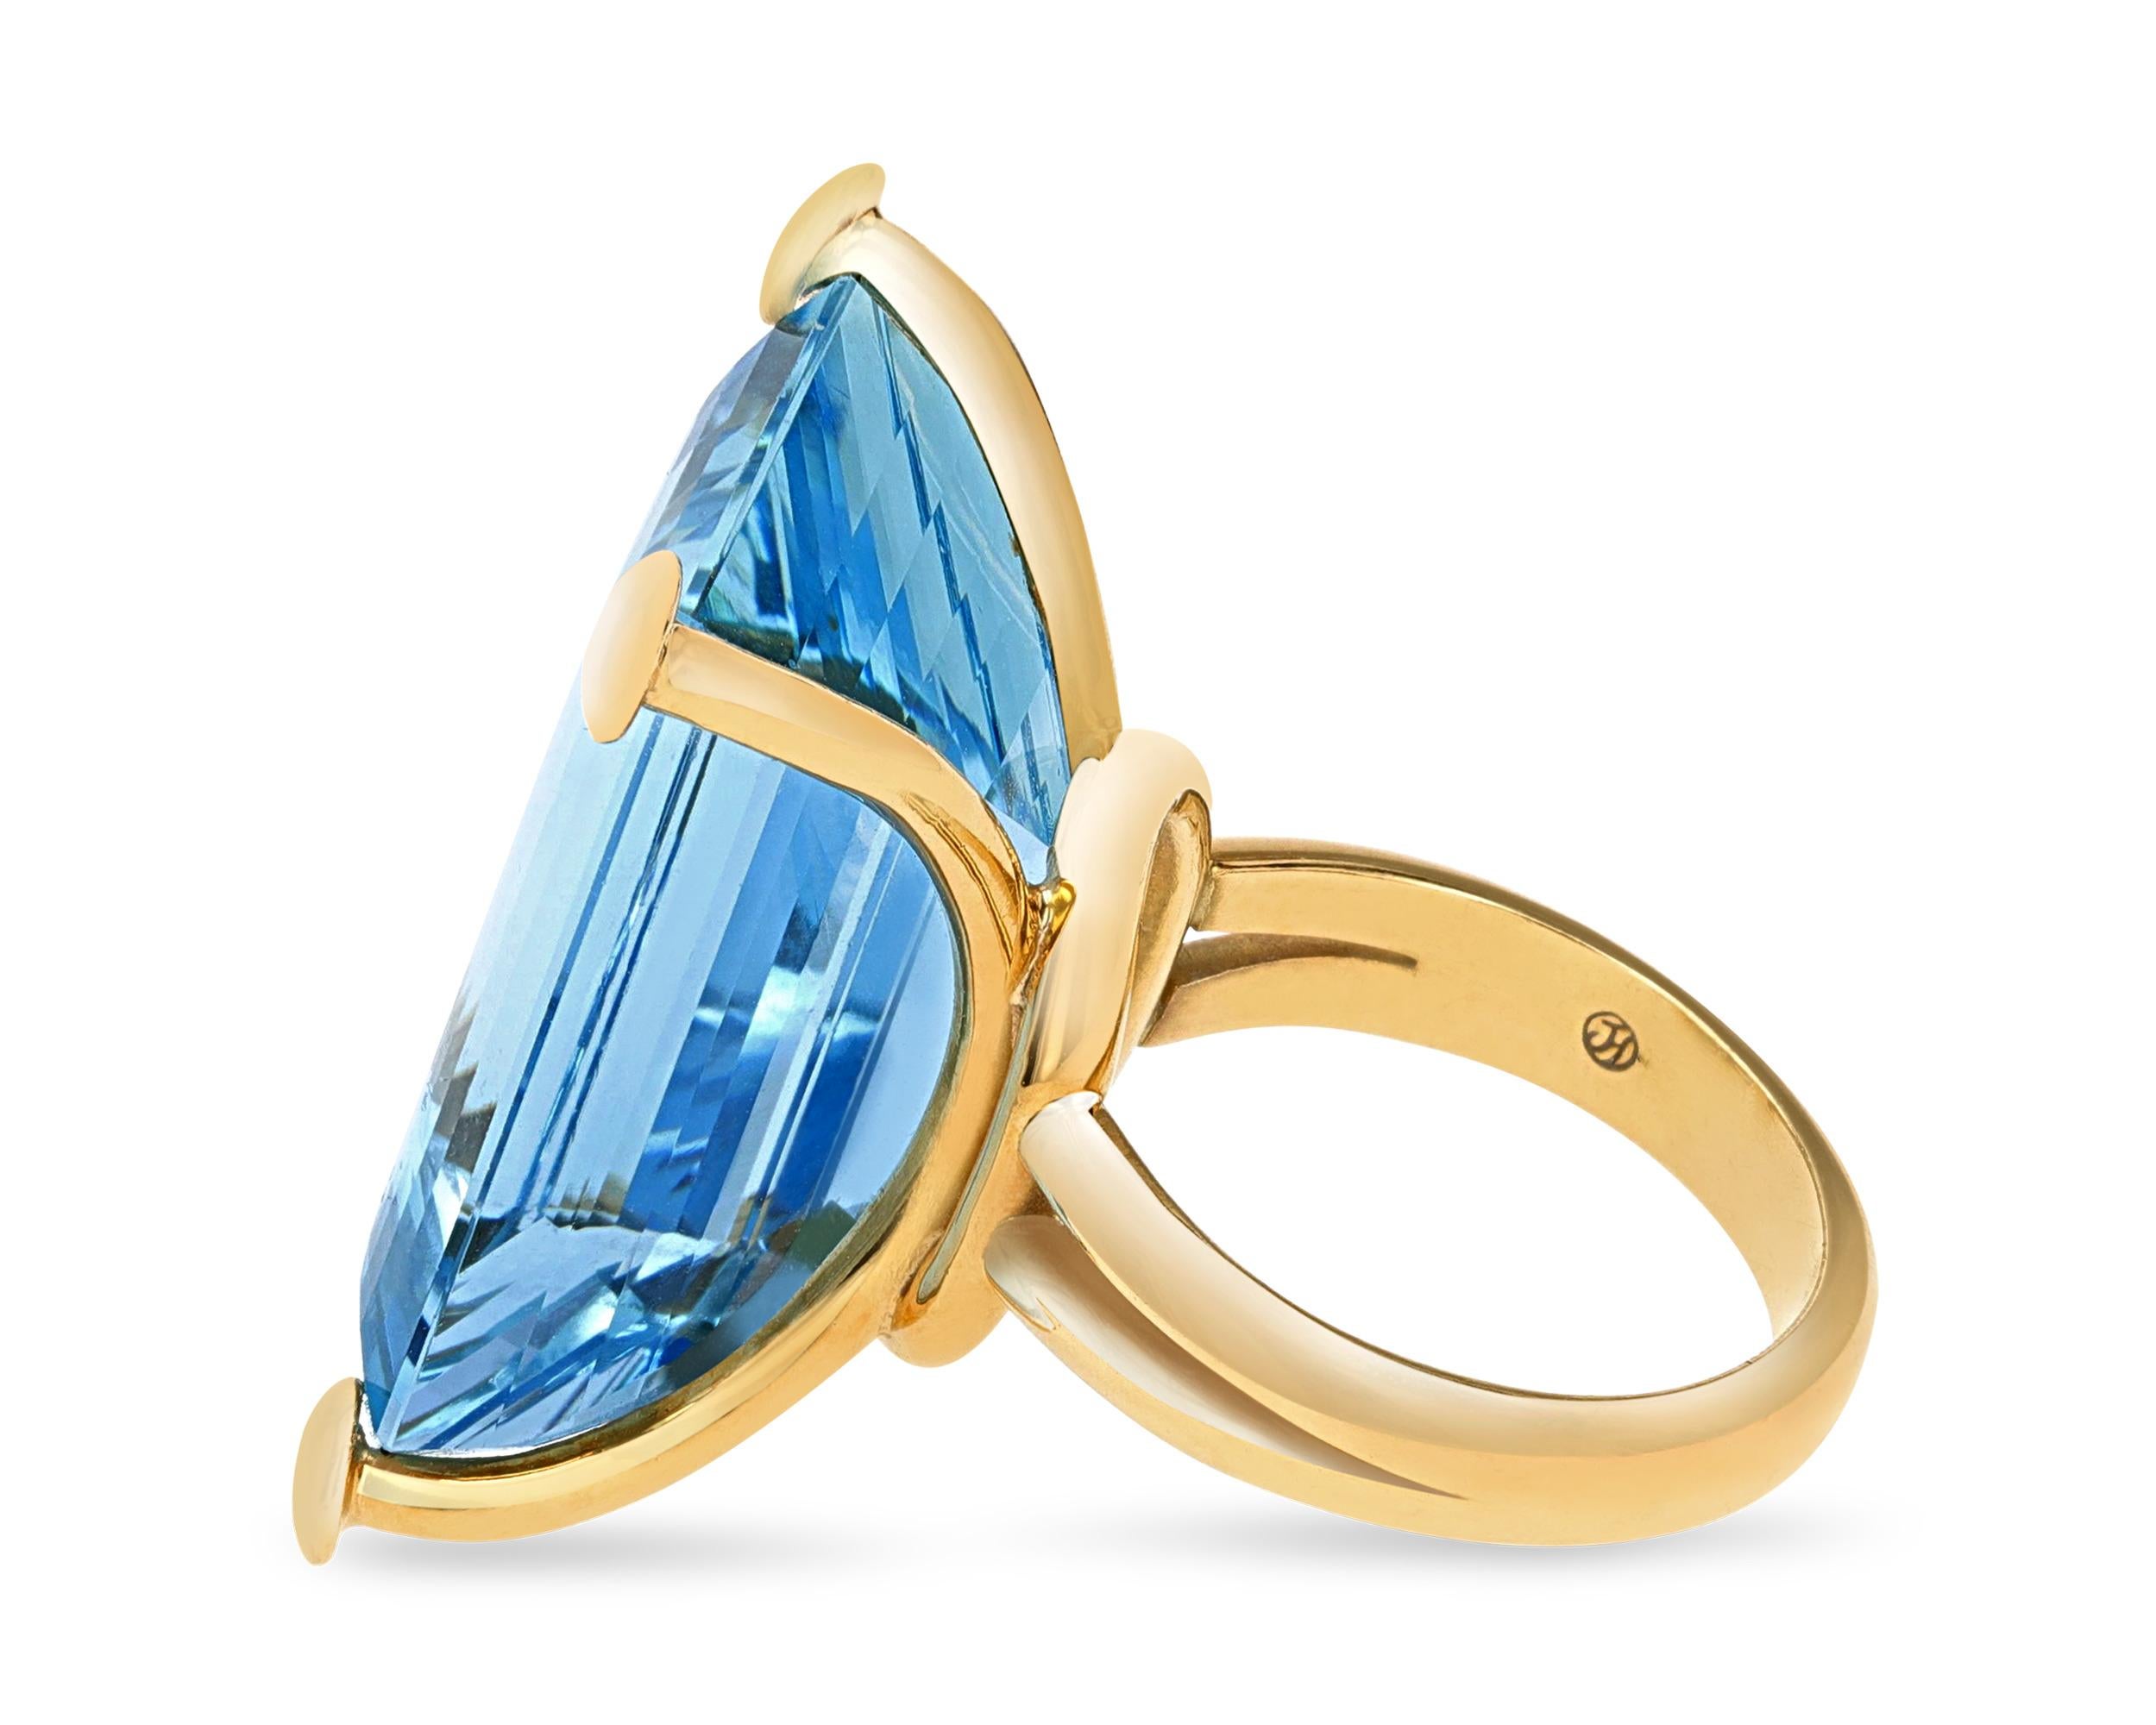 This striking ring features a 32.15 carat emerald-cut aquamarine. The gemstone's dazzling icy blue hue and clarity are emphasized by its regal cut and impressive size. The gemstone is set in a unique 18K yellow gold band with small spheres adorning